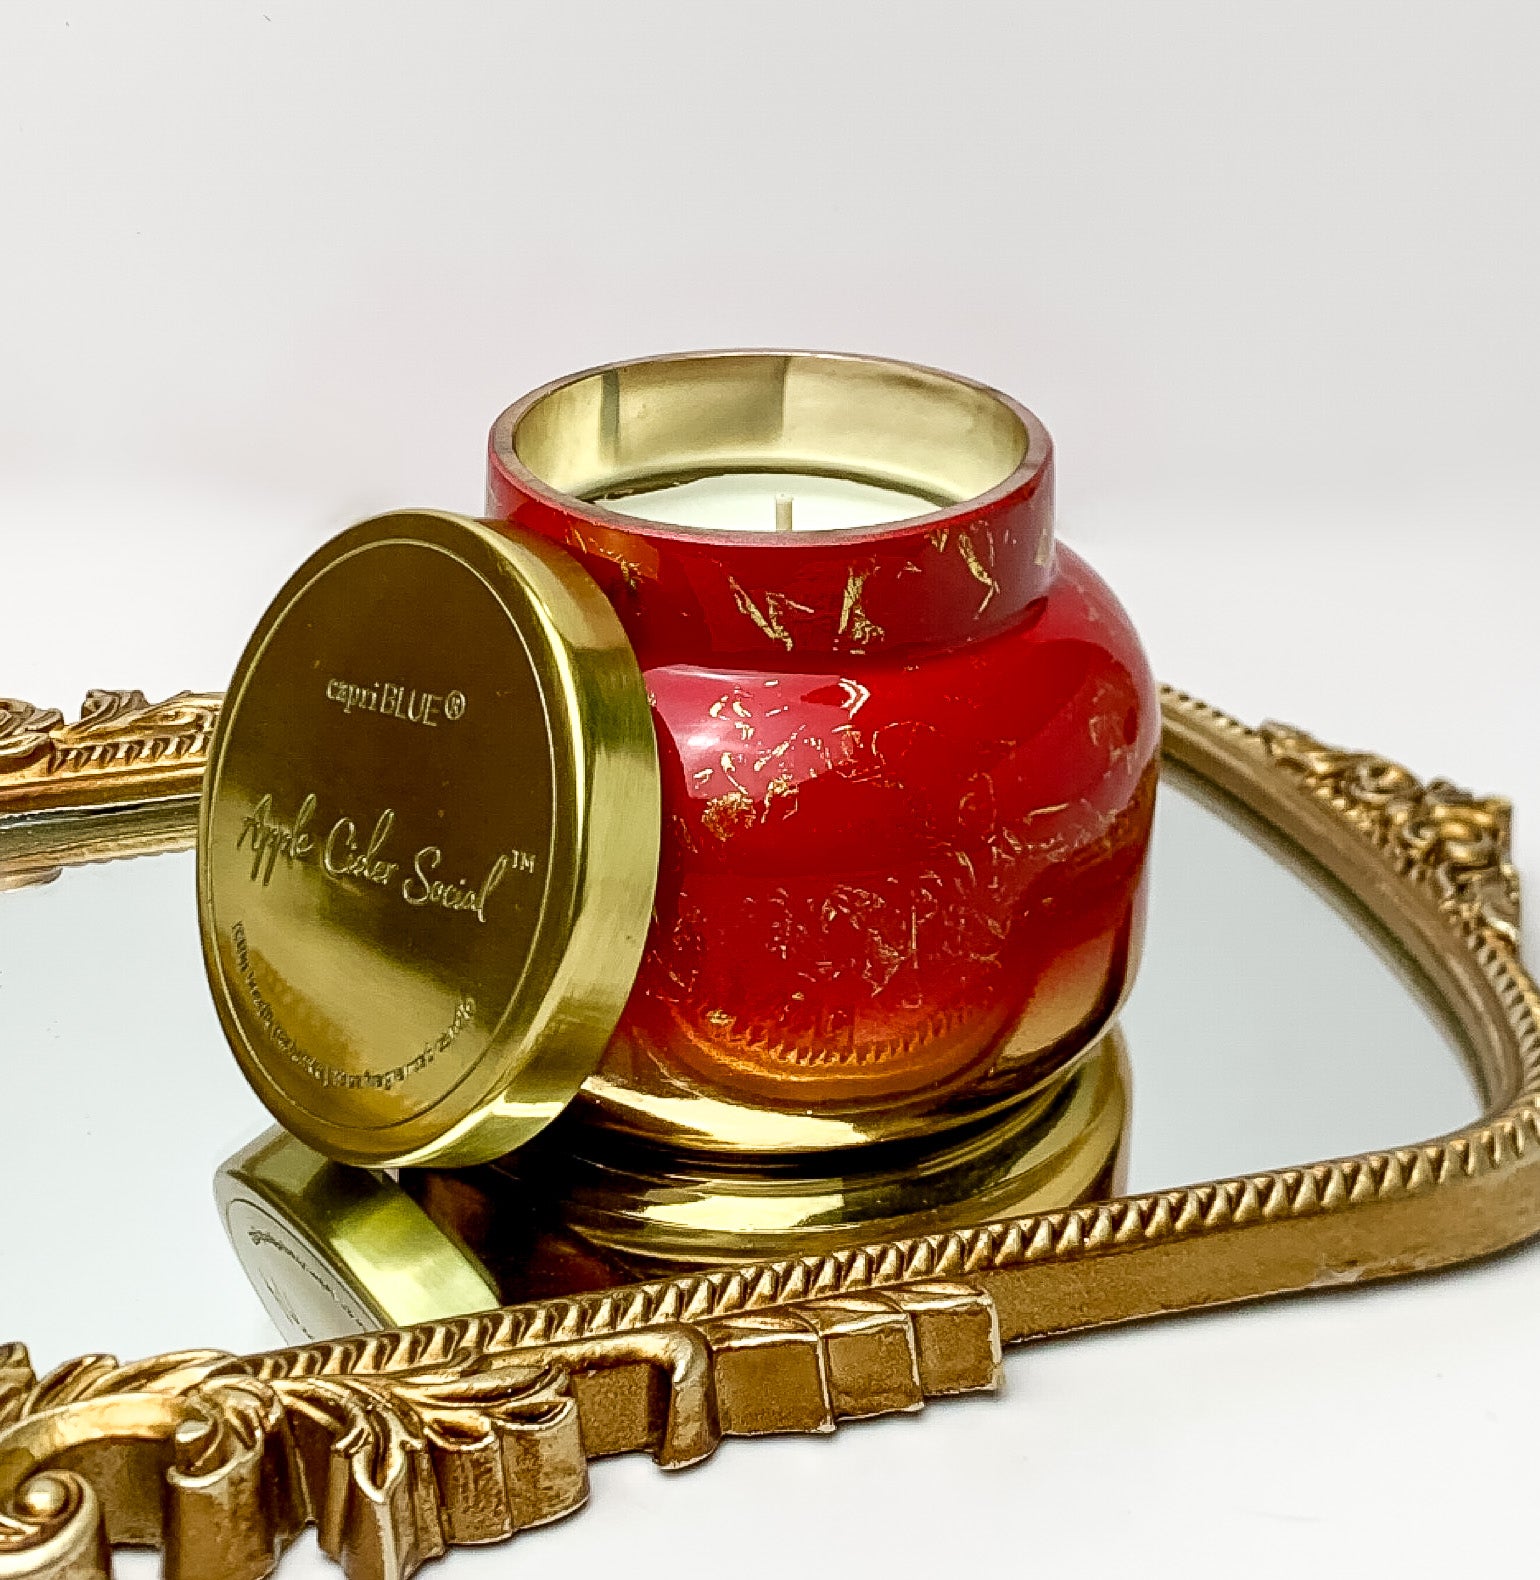 Capri Blue | 19 oz. Jar Candle in Glimmer Signature Jar Candle | Apple Cider Social. This candle is red and gold with a gold lid. The candle is sitting on a gold framed mirror with a white background. 